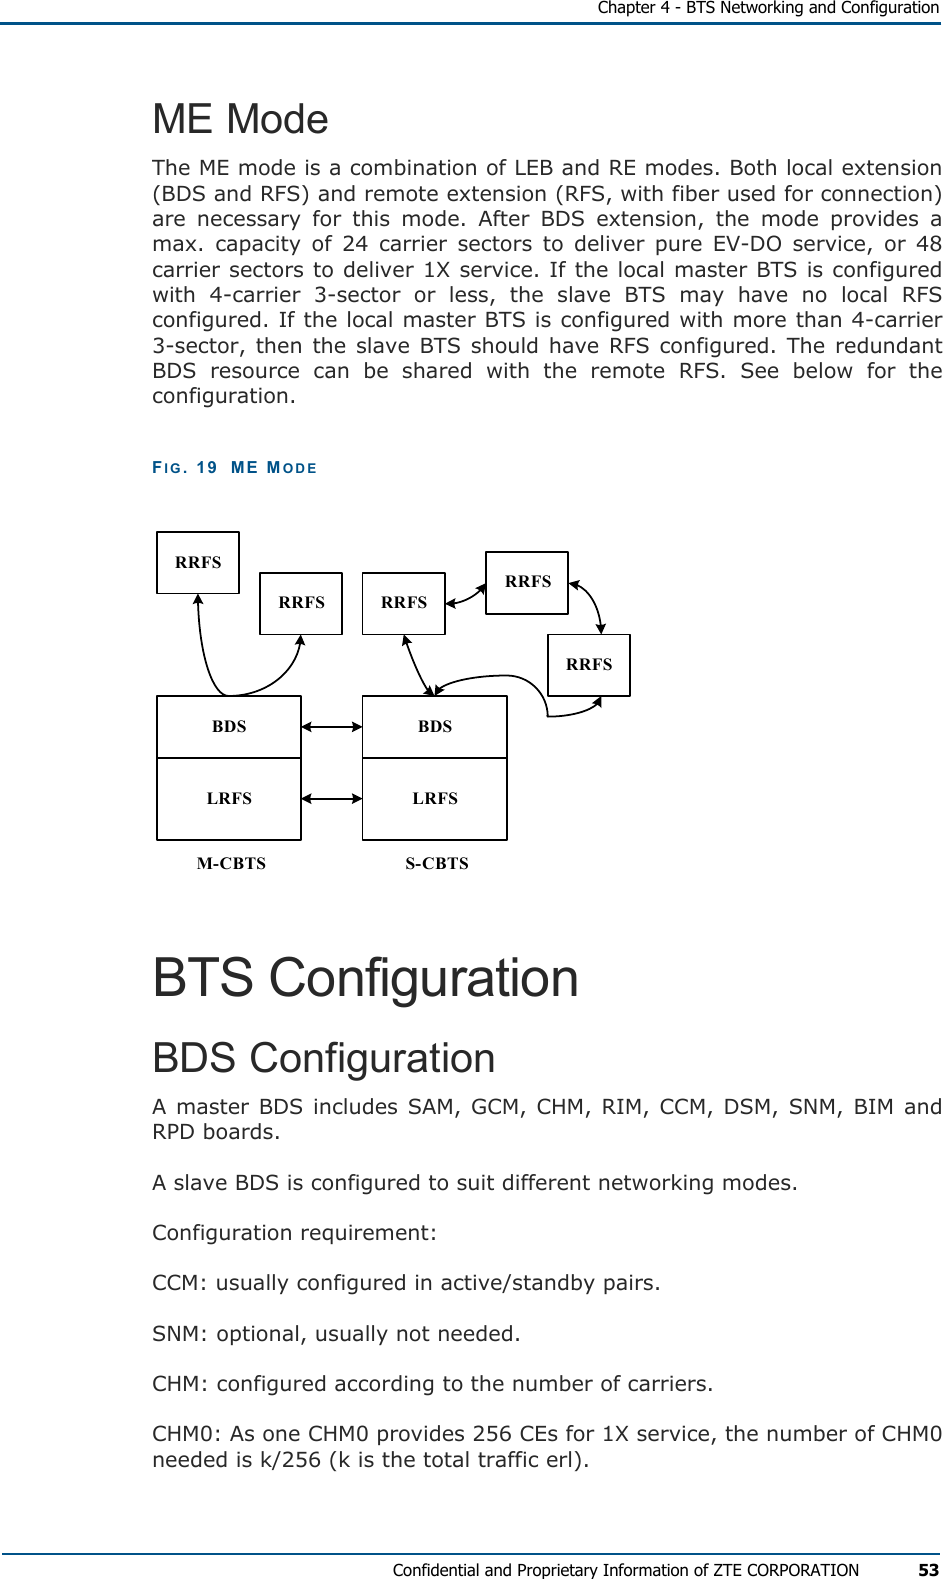   Chapter 4 - BTS Networking and Configuration Confidential and Proprietary Information of ZTE CORPORATION 53 ME Mode The ME mode is a combination of LEB and RE modes. Both local extension (BDS and RFS) and remote extension (RFS, with fiber used for connection) are necessary for this mode. After BDS extension, the mode provides a max. capacity of 24 carrier sectors to deliver pure EV-DO service, or 48 carrier sectors to deliver 1X service. If the local master BTS is configured with 4-carrier 3-sector or less, the slave BTS may have no local RFS configured. If the local master BTS is configured with more than 4-carrier 3-sector, then the slave BTS should have RFS configured. The redundant BDS resource can be shared with the remote RFS. See below for the configuration.  FIG. 19  ME MODE BDSLRFSBDSLRFSRRFSRRFSRRFSRRFSRRFSM-CBTS S-CBTS BTS Configuration BDS Configuration A master BDS includes SAM, GCM, CHM, RIM, CCM, DSM, SNM, BIM and RPD boards. A slave BDS is configured to suit different networking modes.  Configuration requirement:  CCM: usually configured in active/standby pairs.  SNM: optional, usually not needed.  CHM: configured according to the number of carriers.  CHM0: As one CHM0 provides 256 CEs for 1X service, the number of CHM0 needed is k/256 (k is the total traffic erl).  